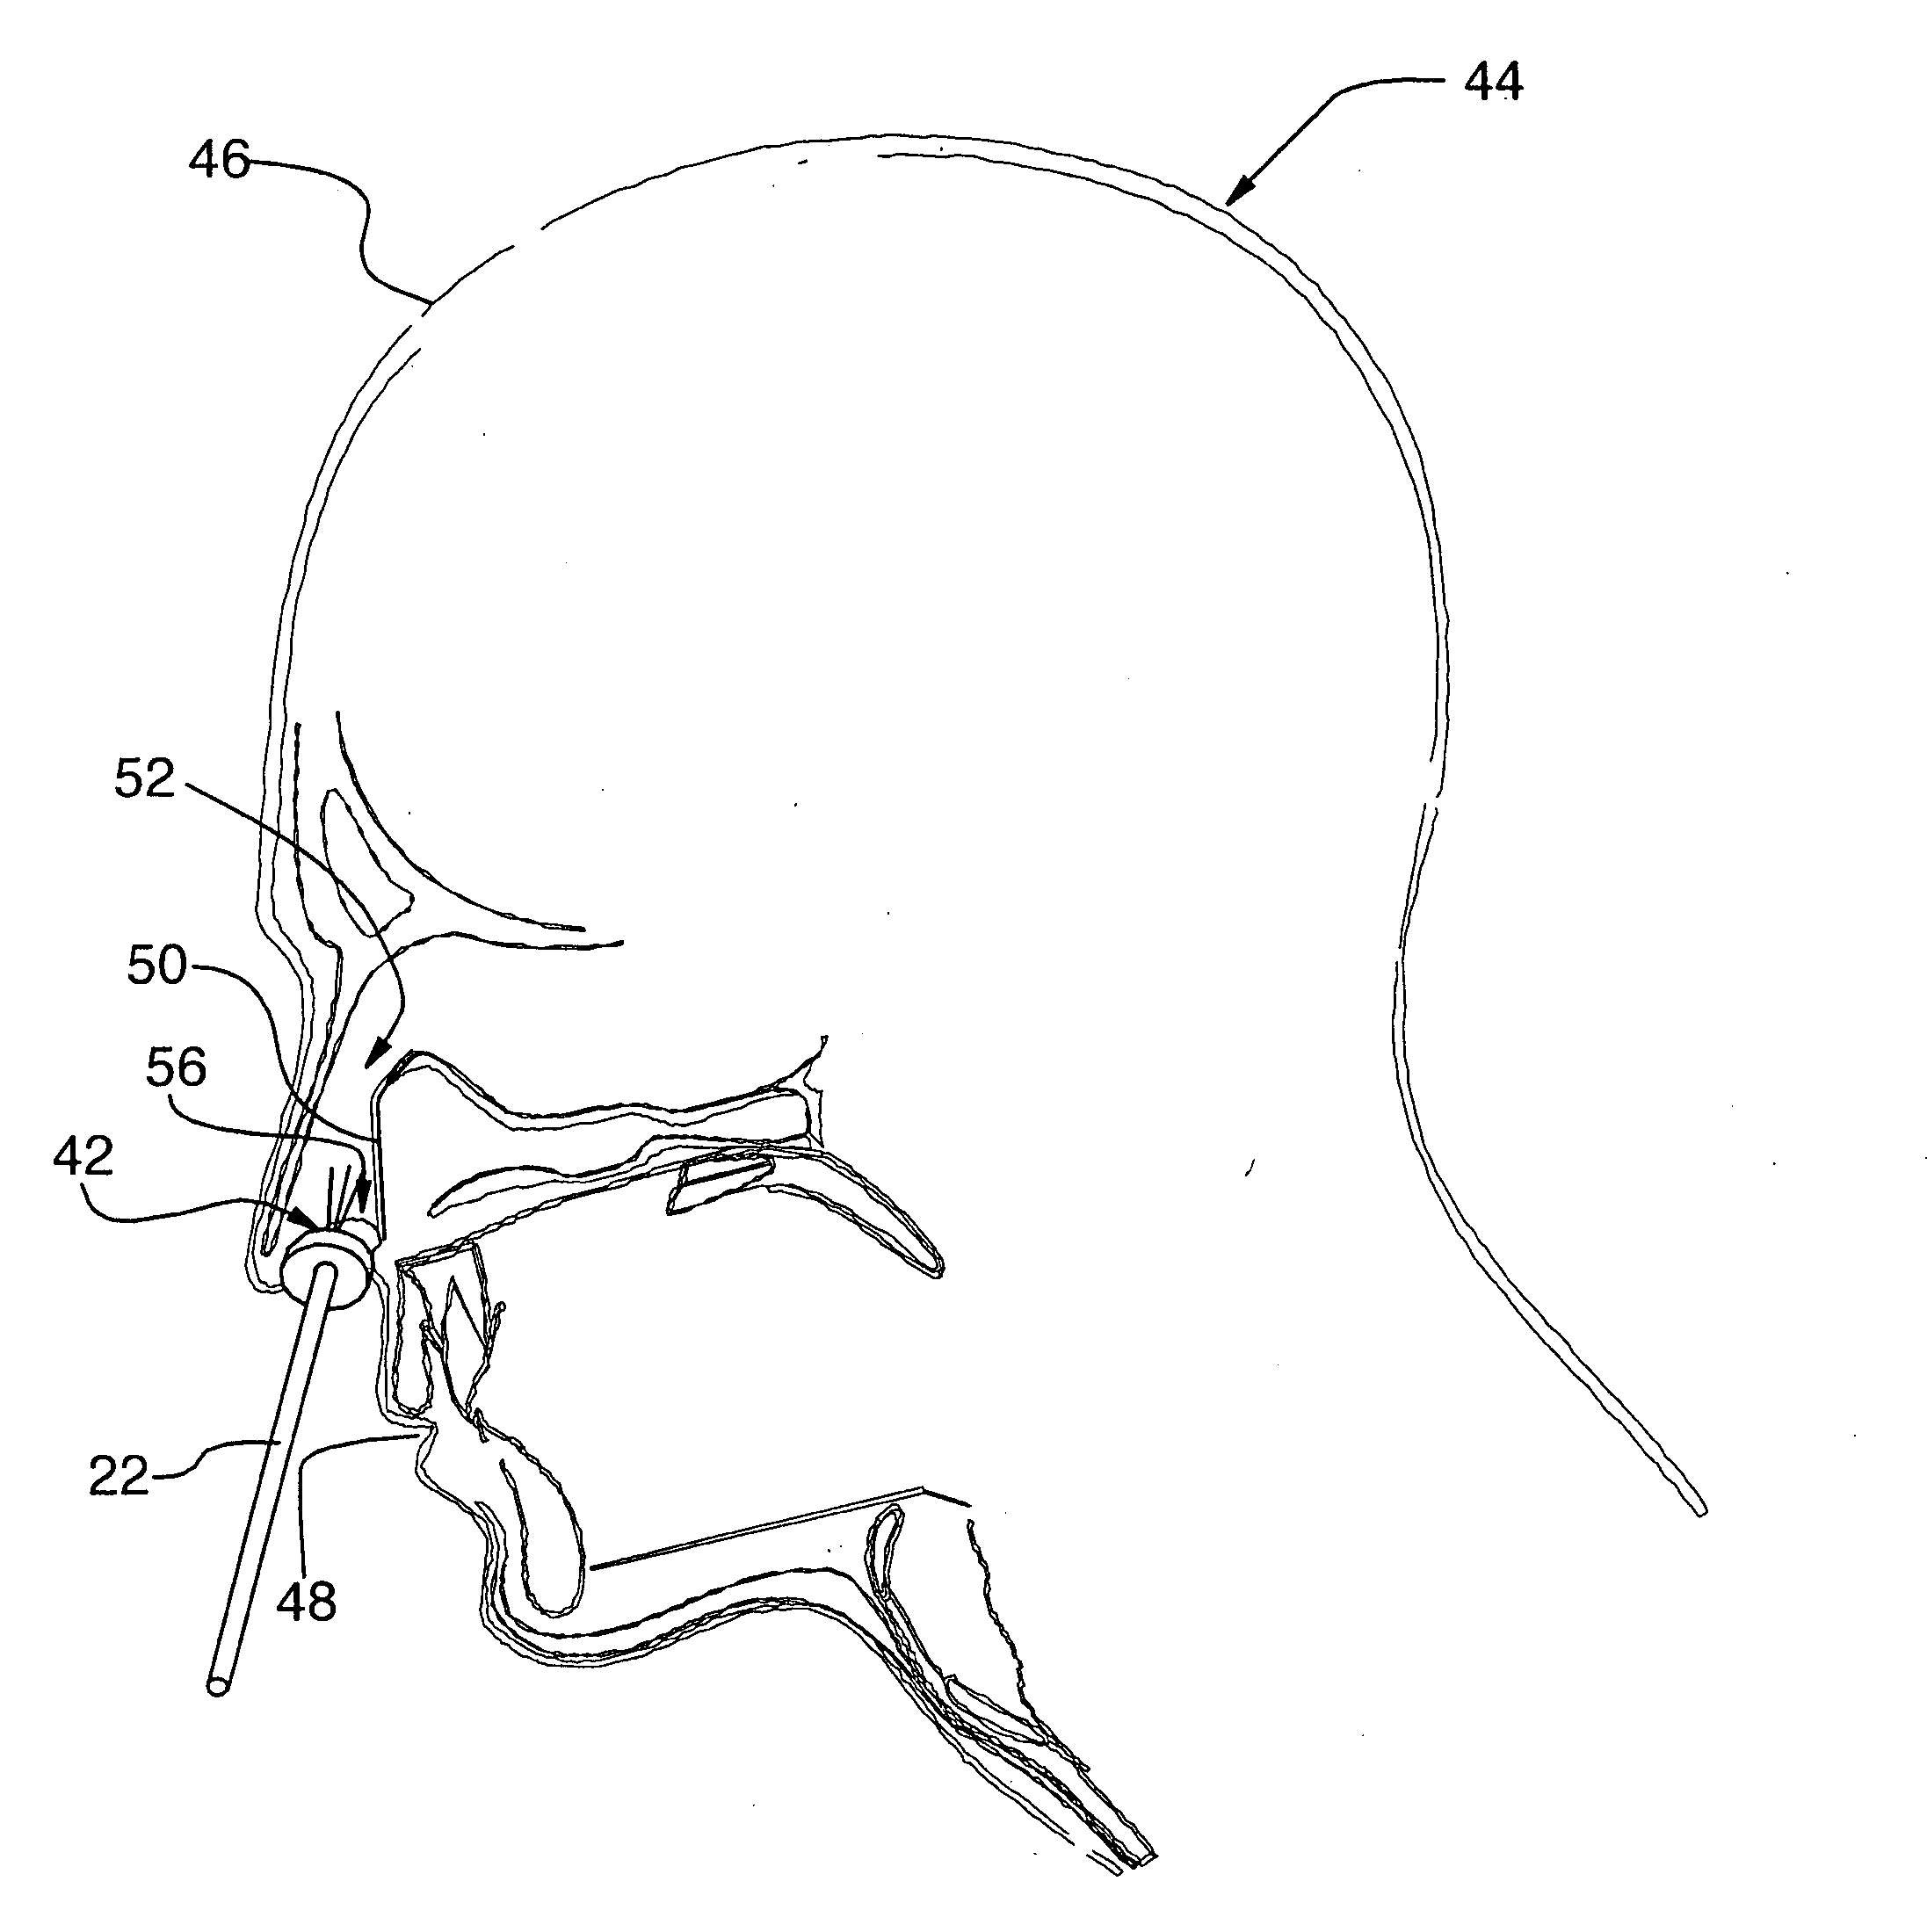 Method and apparatus for alleviating nasal congestion